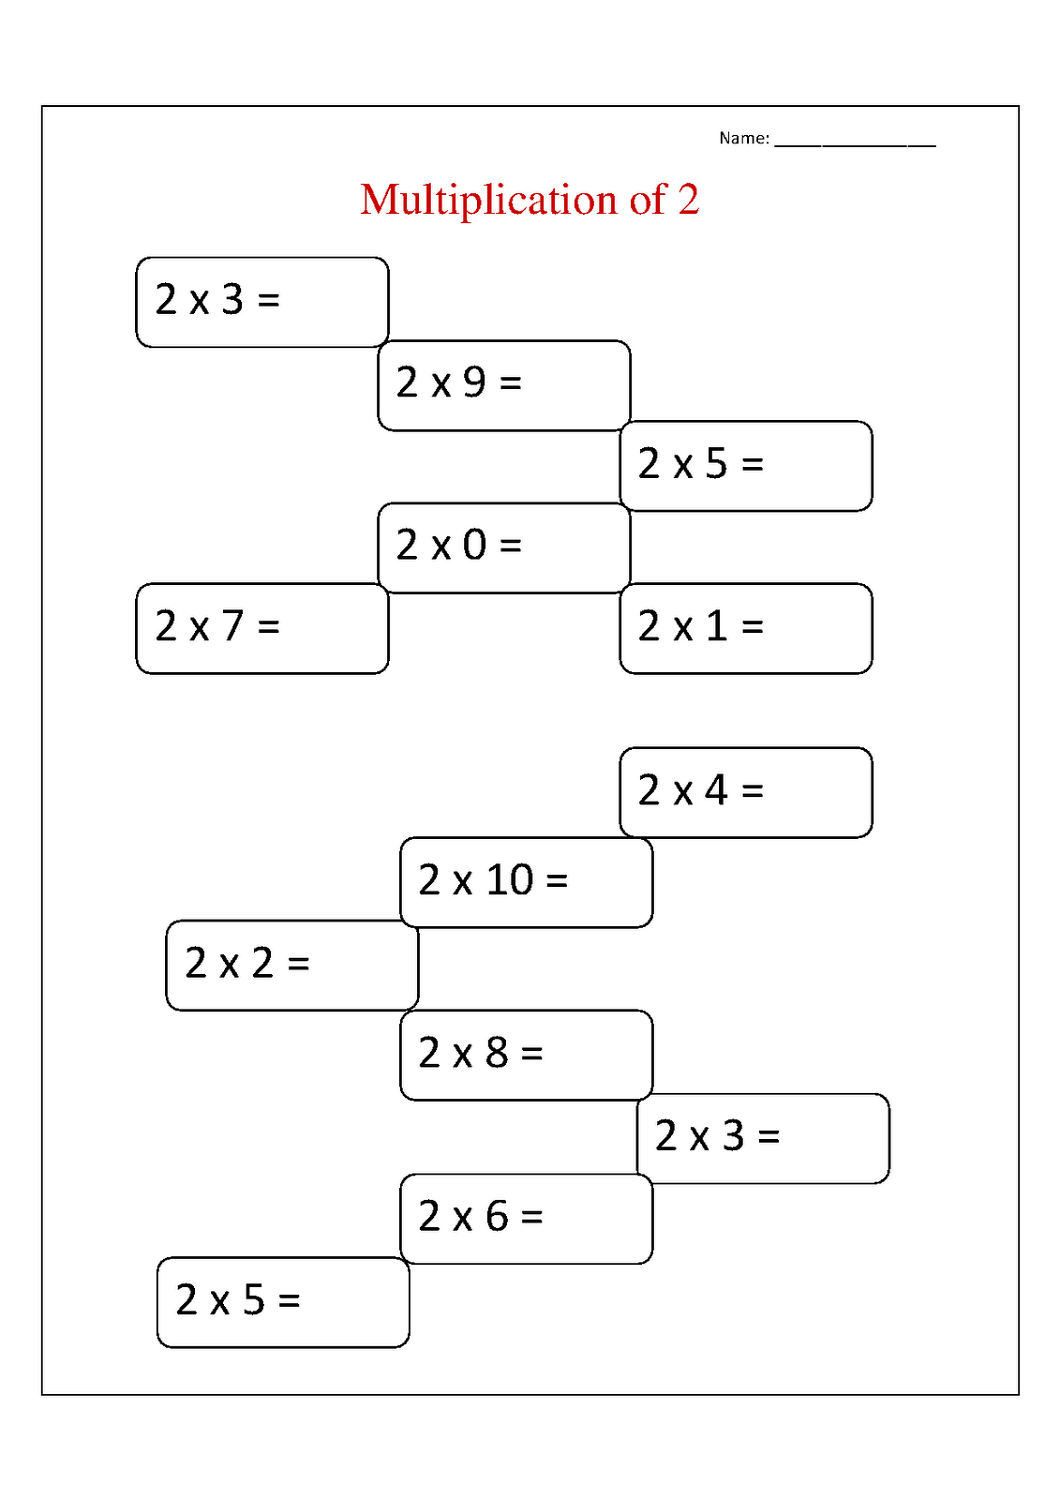 2 times table worksheets learning